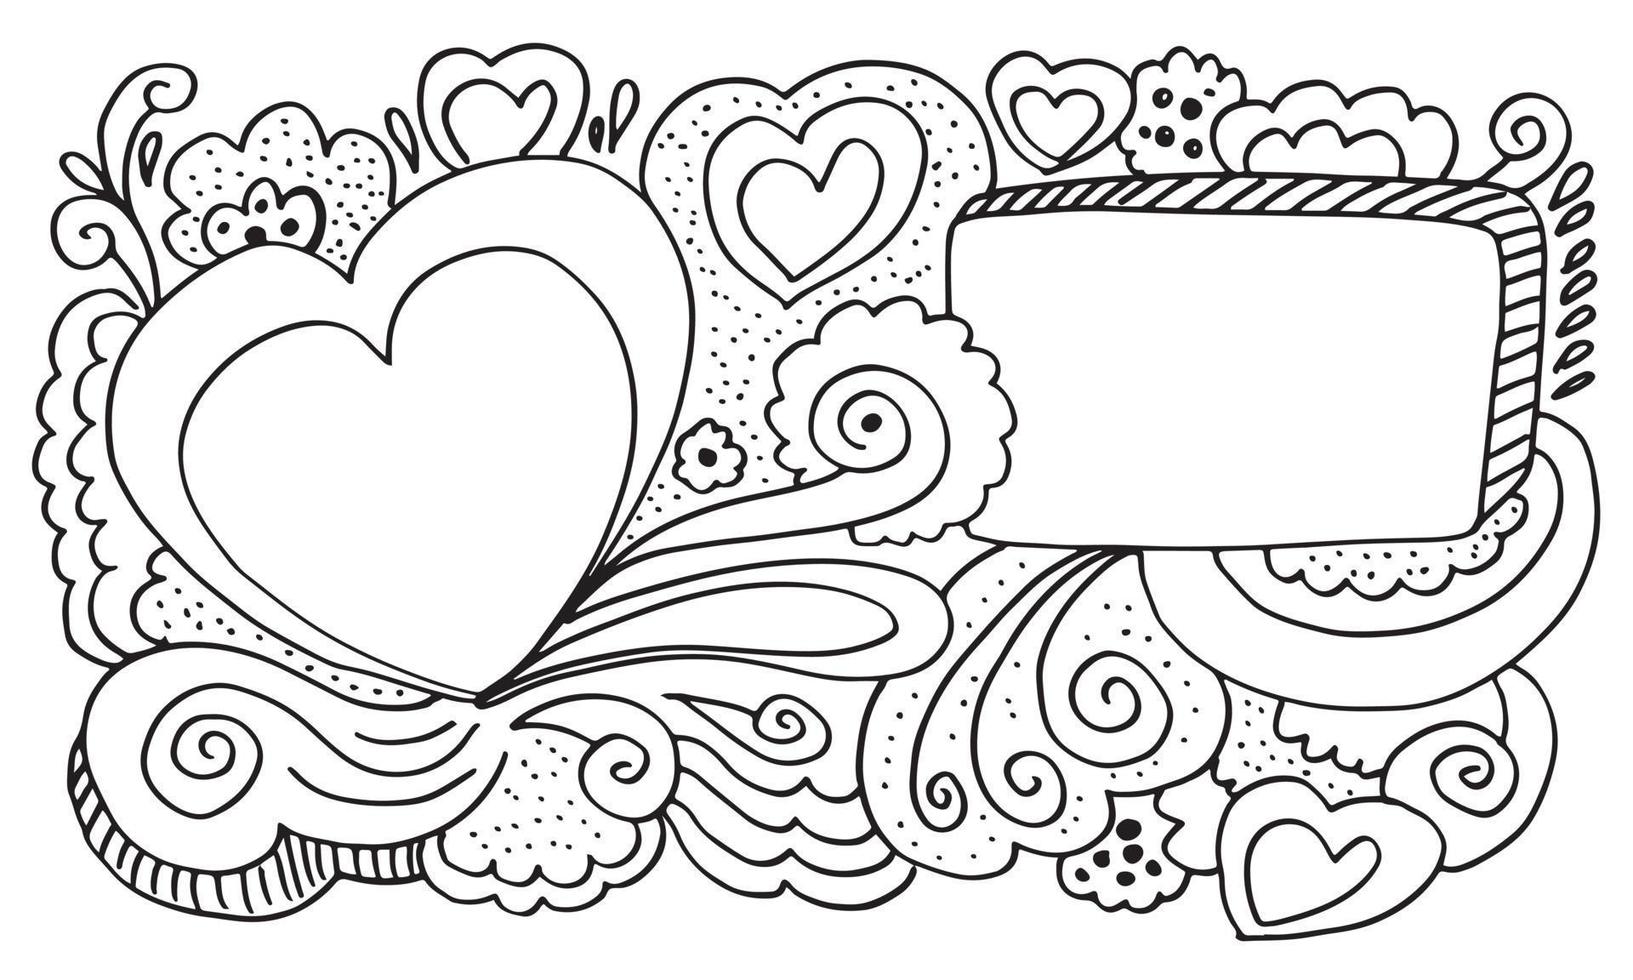 Vector background with hearts and frame of doodles. Wedding, Valentines Day card in hand drawn style.vector illustration.eps 10.